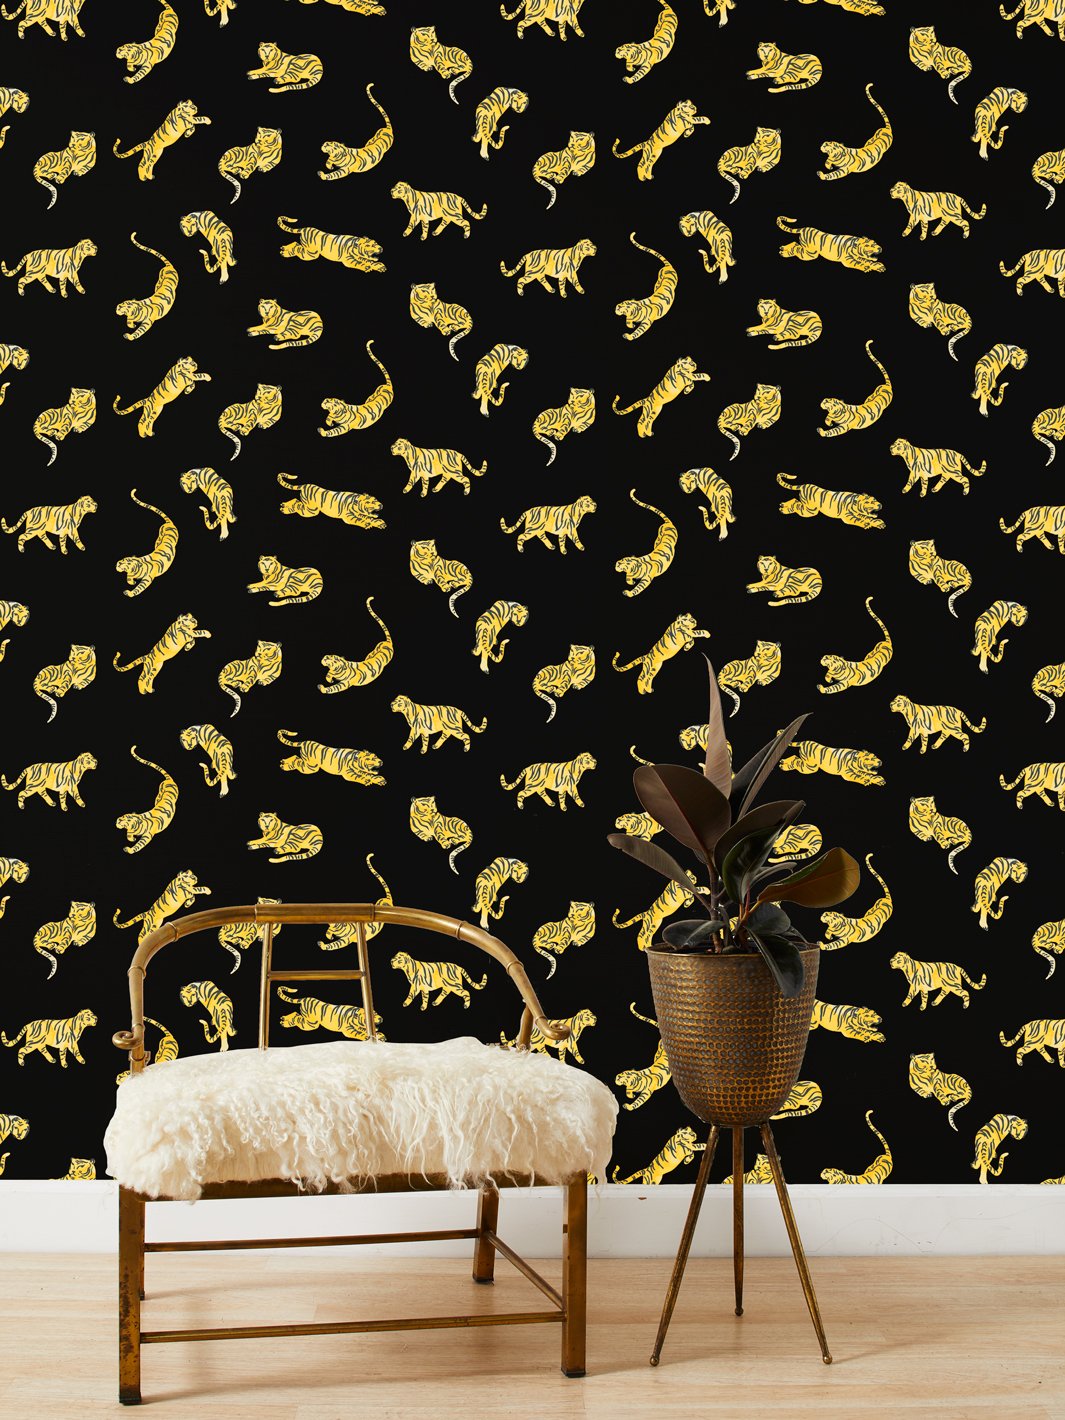 'Tigers' Grasscloth' Wallpaper by Tea Collection - Black